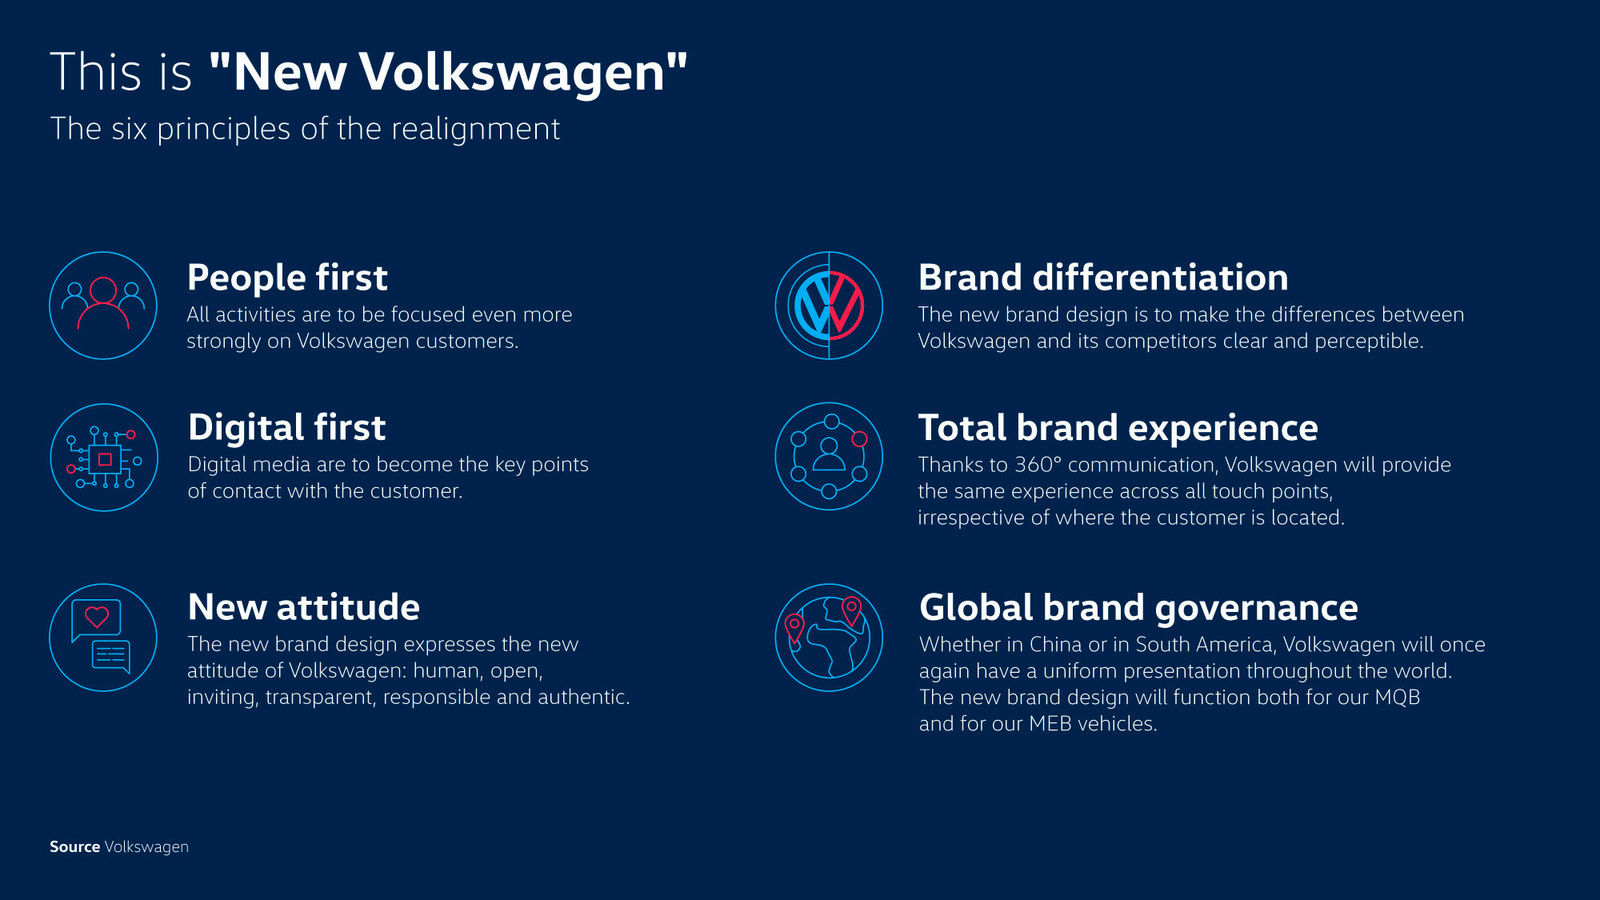 Story "New Volkswagen – how does a global brand reinvent itself?"